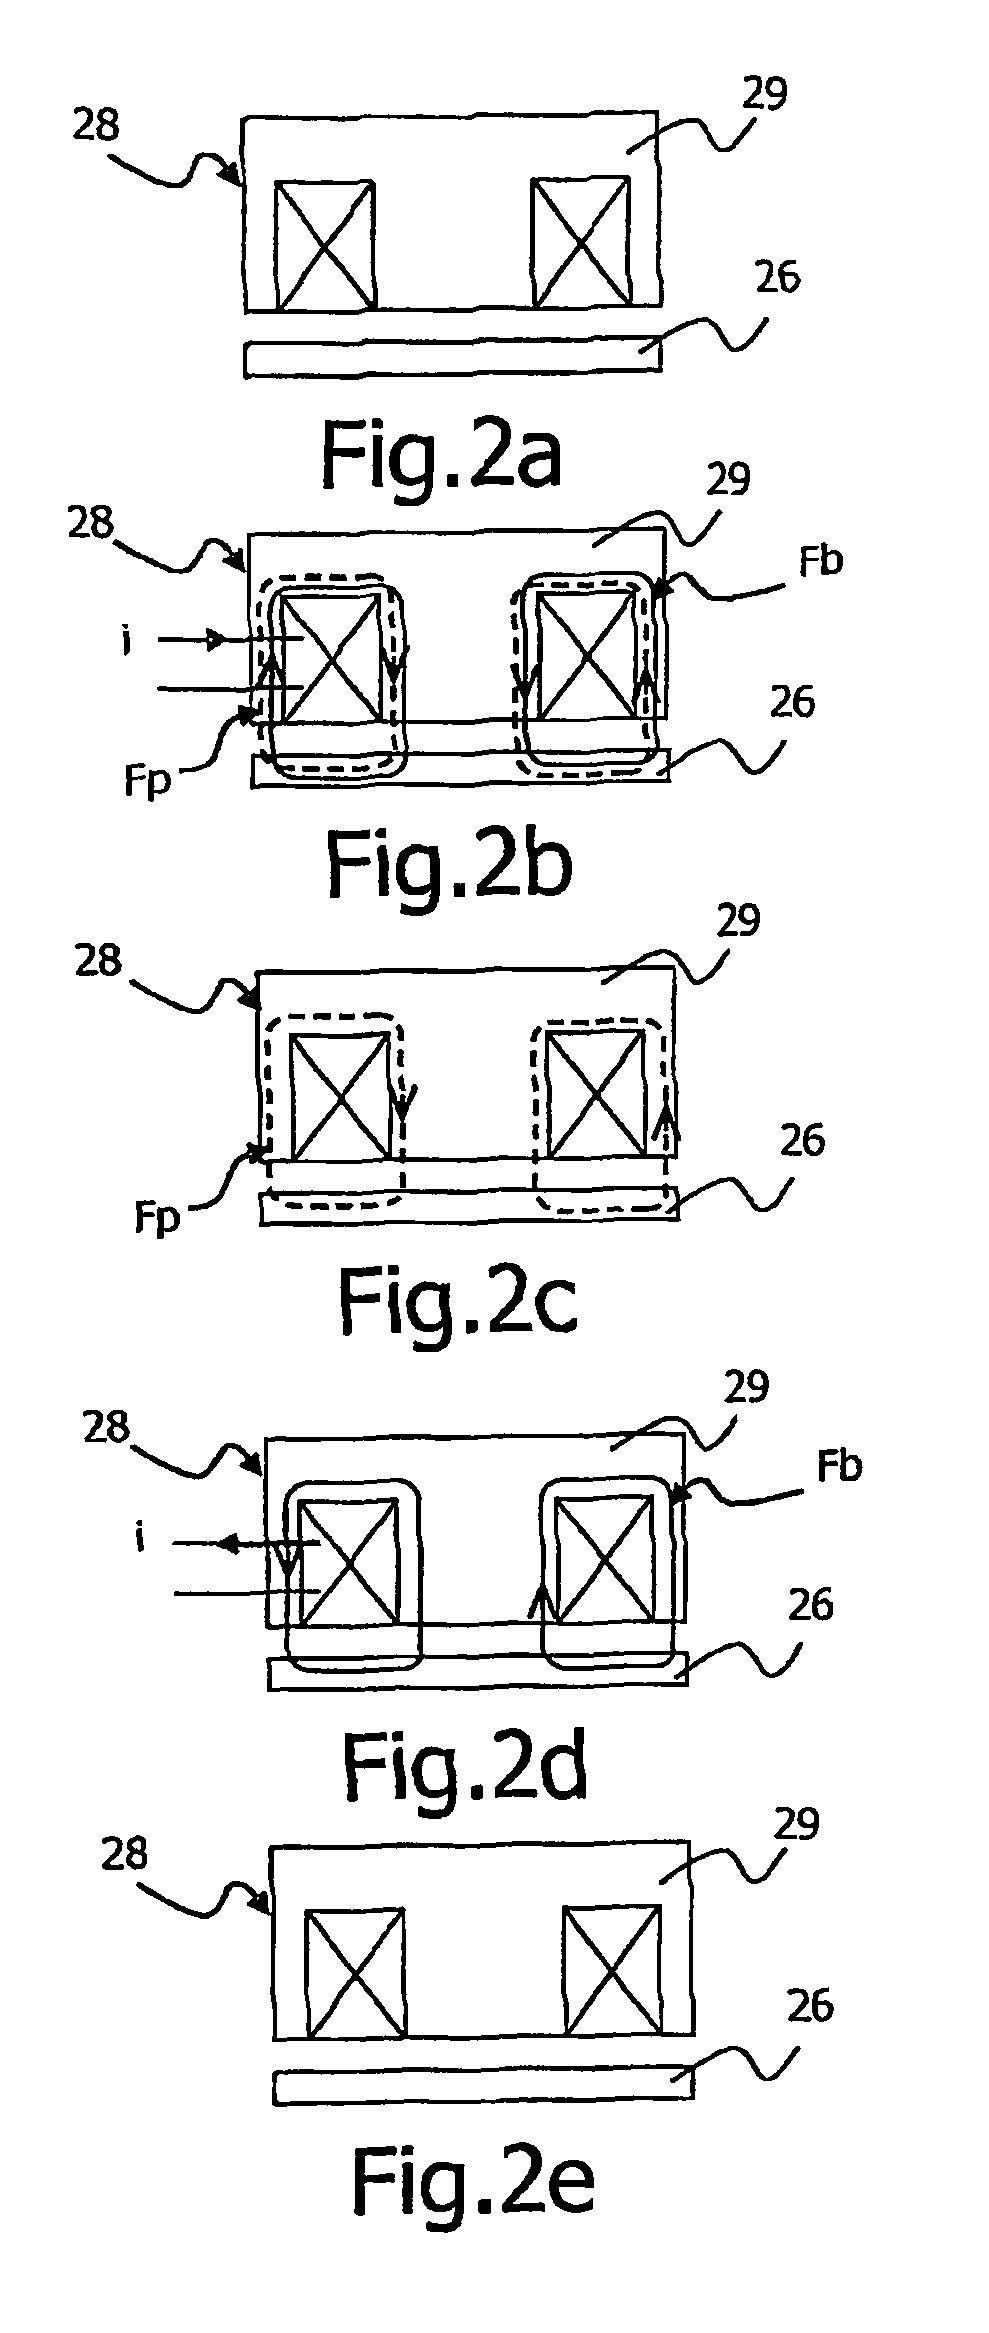 Electromagnet-equipped control device for an internal combustion engine valve